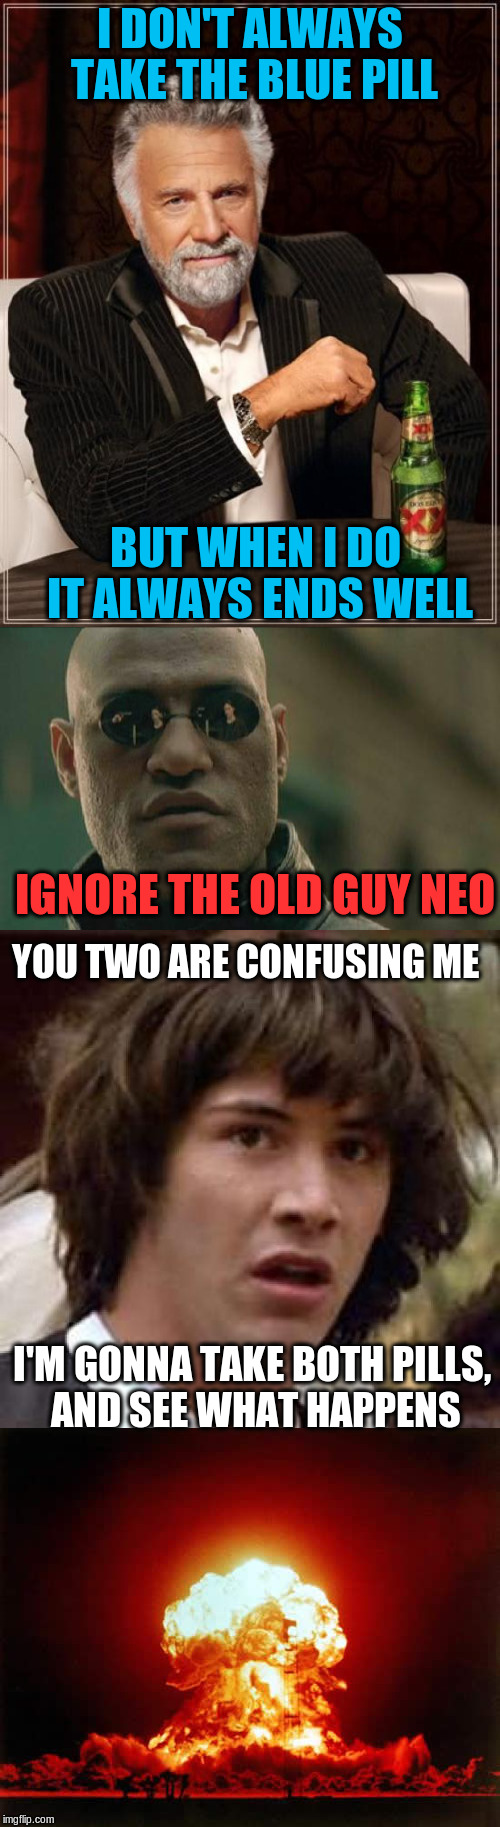 Interesting guy vs Morpheus | I DON'T ALWAYS TAKE THE BLUE PILL; BUT WHEN I DO IT ALWAYS ENDS WELL; IGNORE THE OLD GUY NEO; YOU TWO ARE CONFUSING ME; I'M GONNA TAKE BOTH PILLS, AND SEE WHAT HAPPENS | image tagged in matrix,viagra,neo,morpheus | made w/ Imgflip meme maker